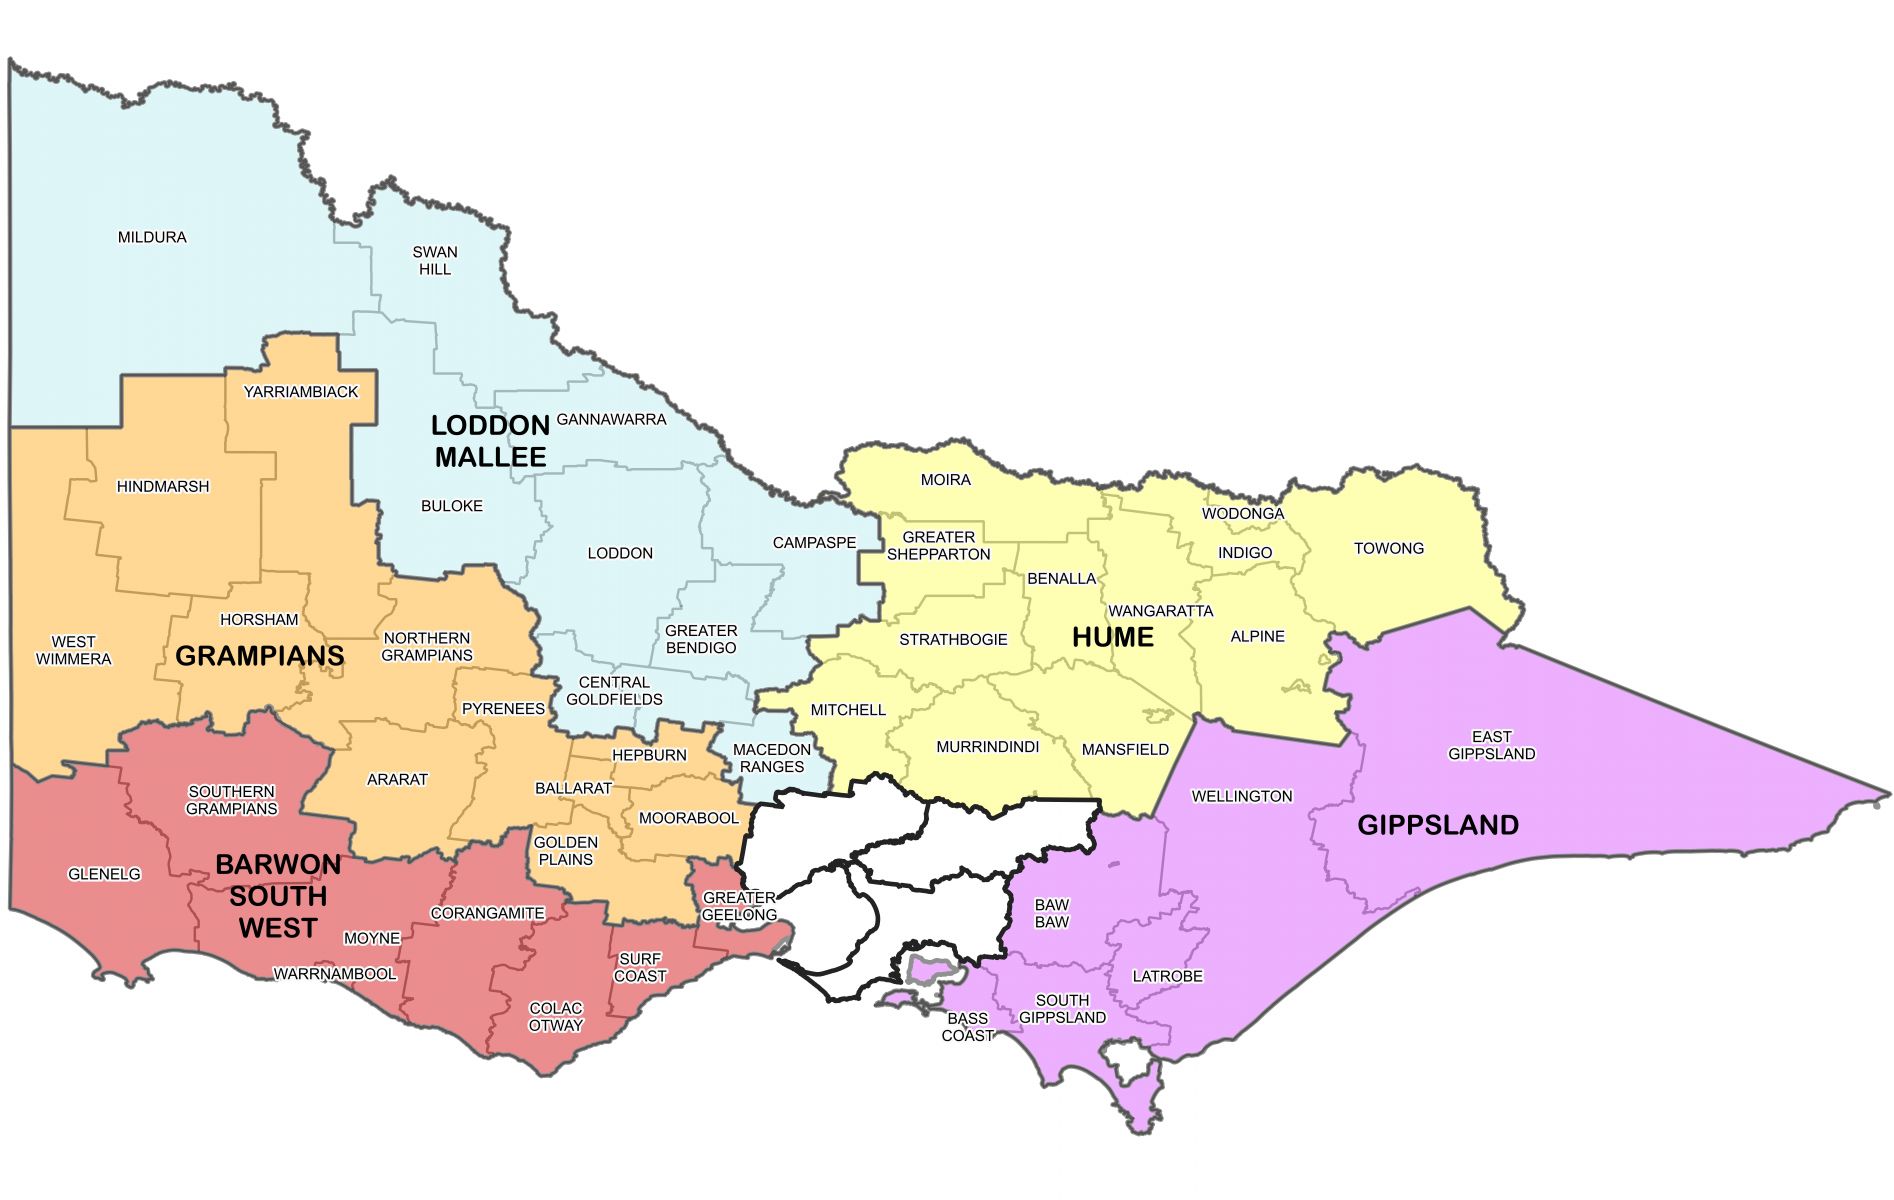 This map shows the areas which make up the Victorian regions